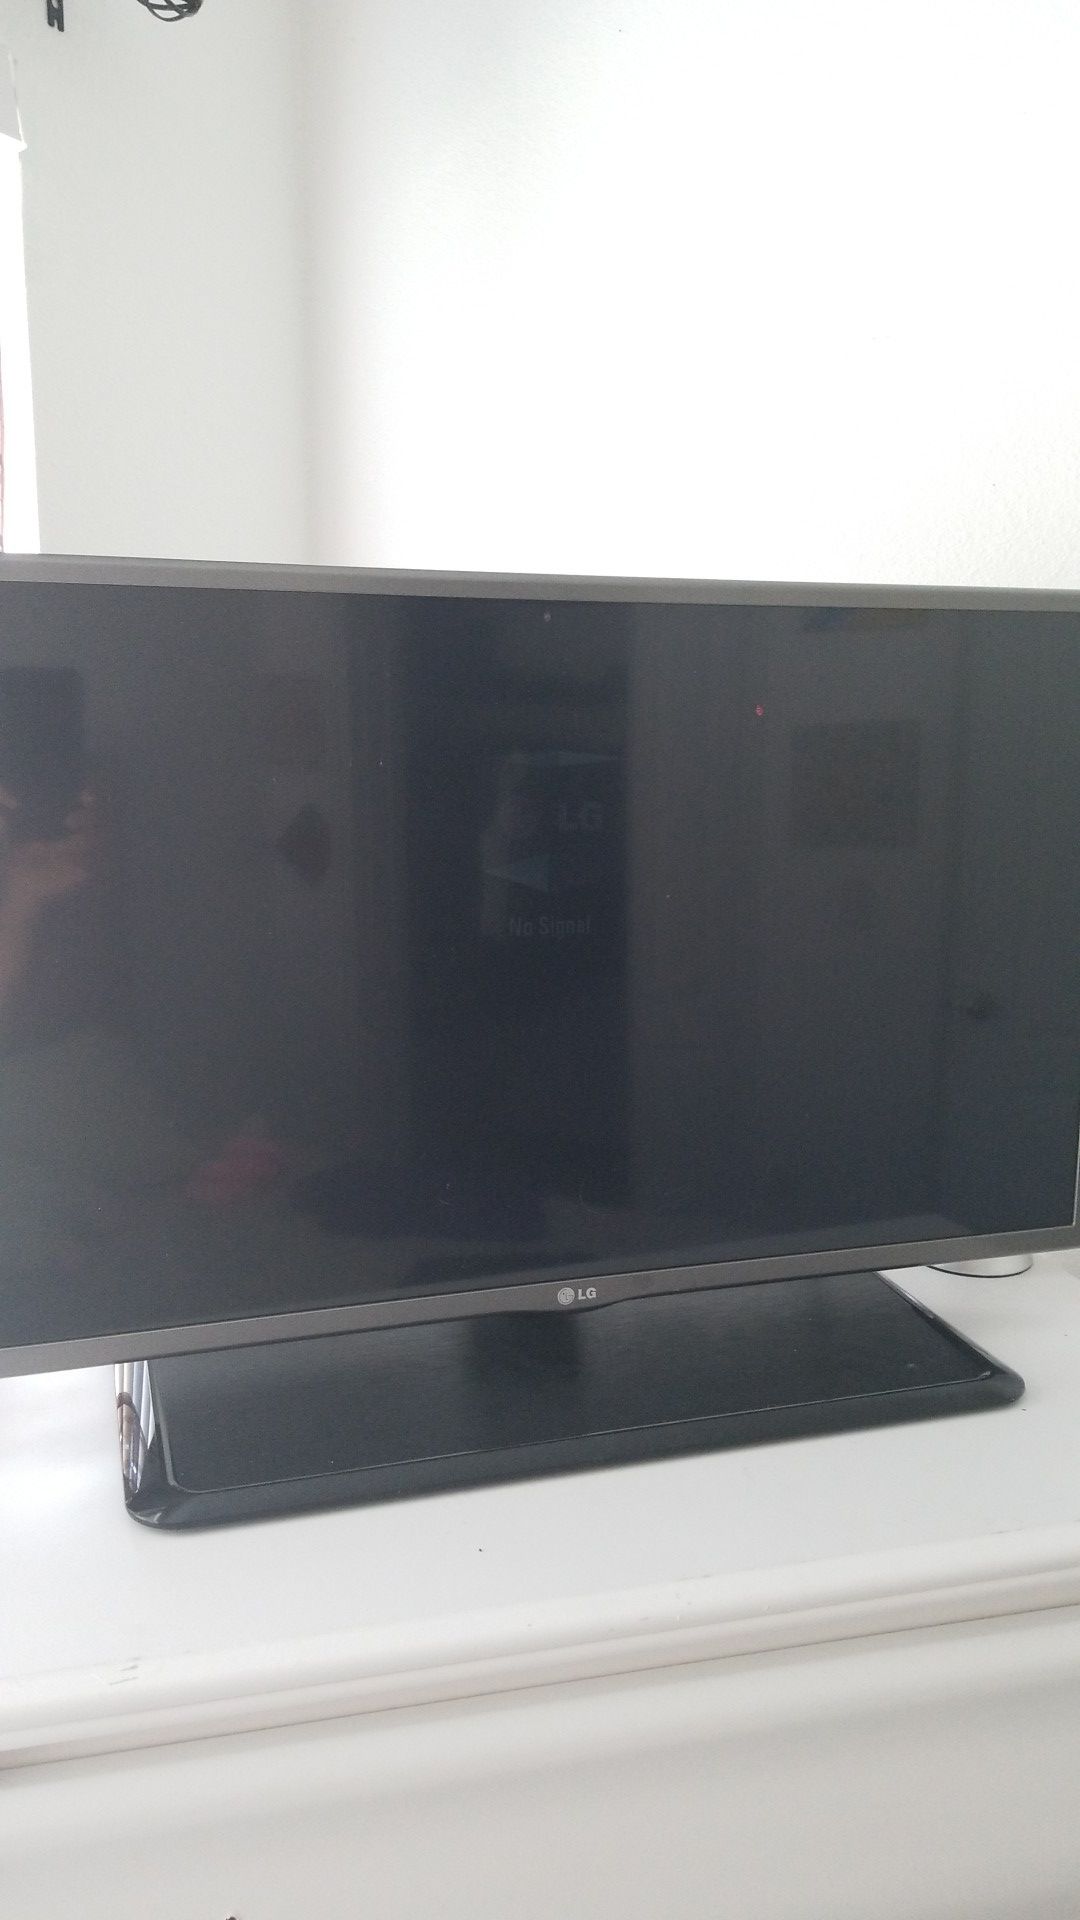 Tv lg 32 inches, without remote control